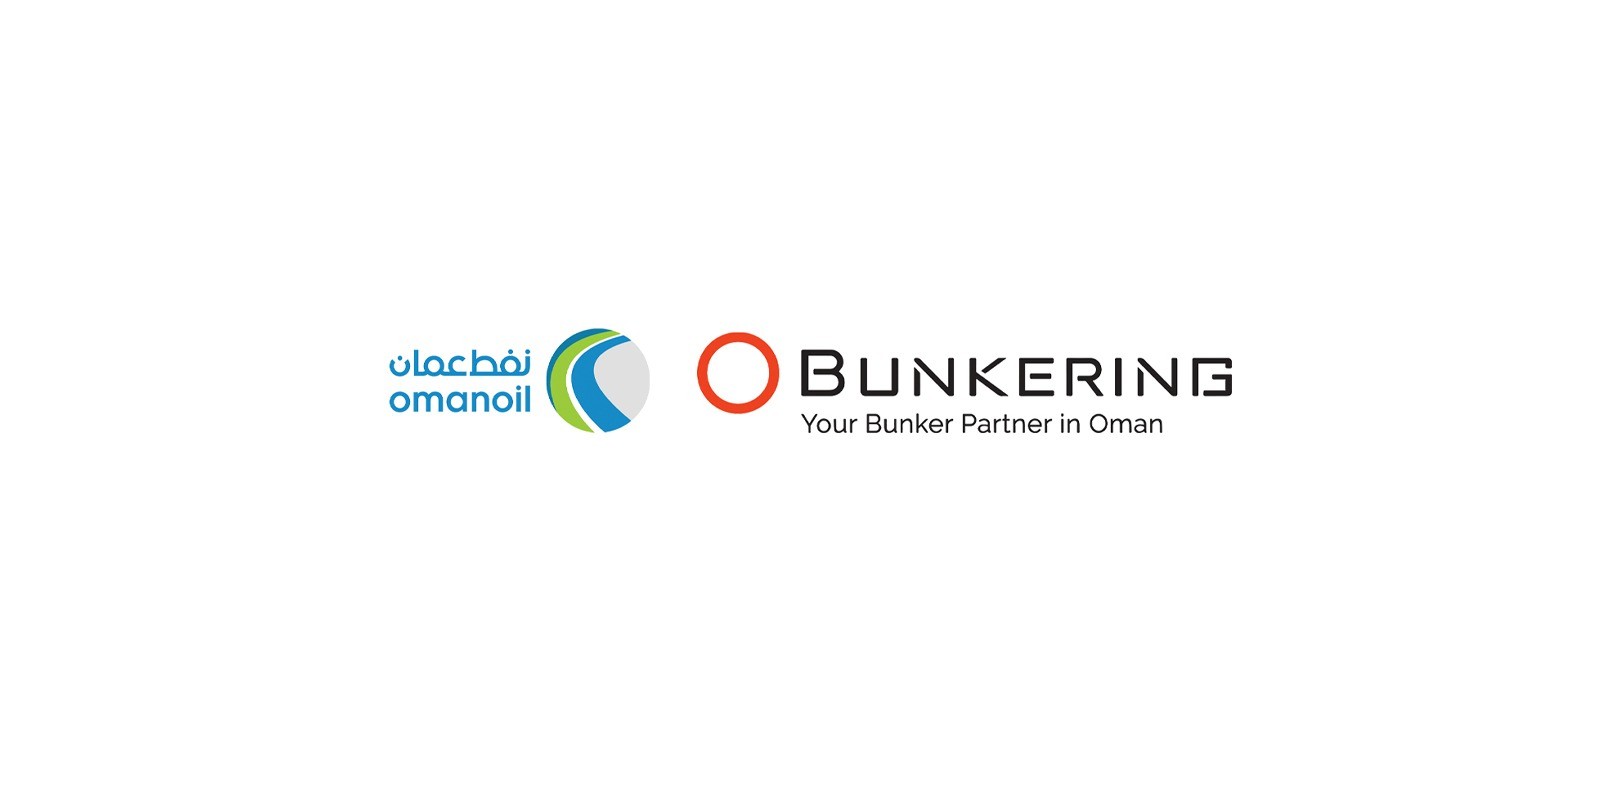 Oman Oil Marketing Company signs an agreement with O Bunkering to promote bunker fuels at Duqm Port